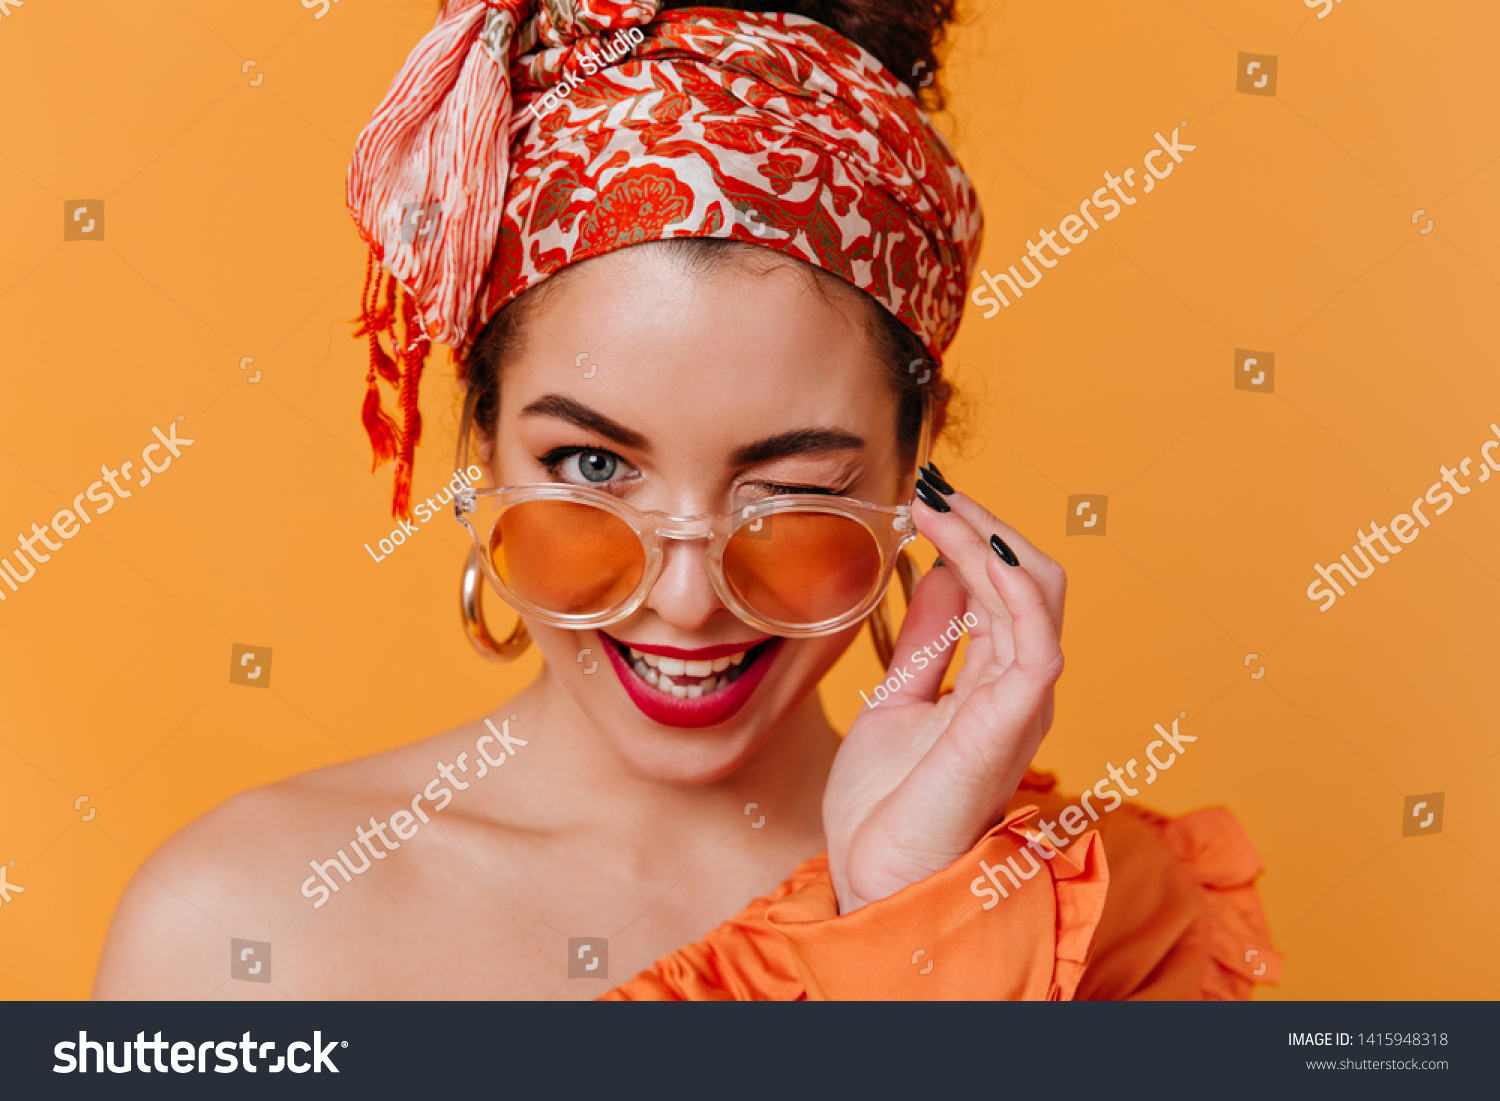 Lovely woman in African-style massive earrings and headband removes her orange glasses and winks coquettishly #1415948318